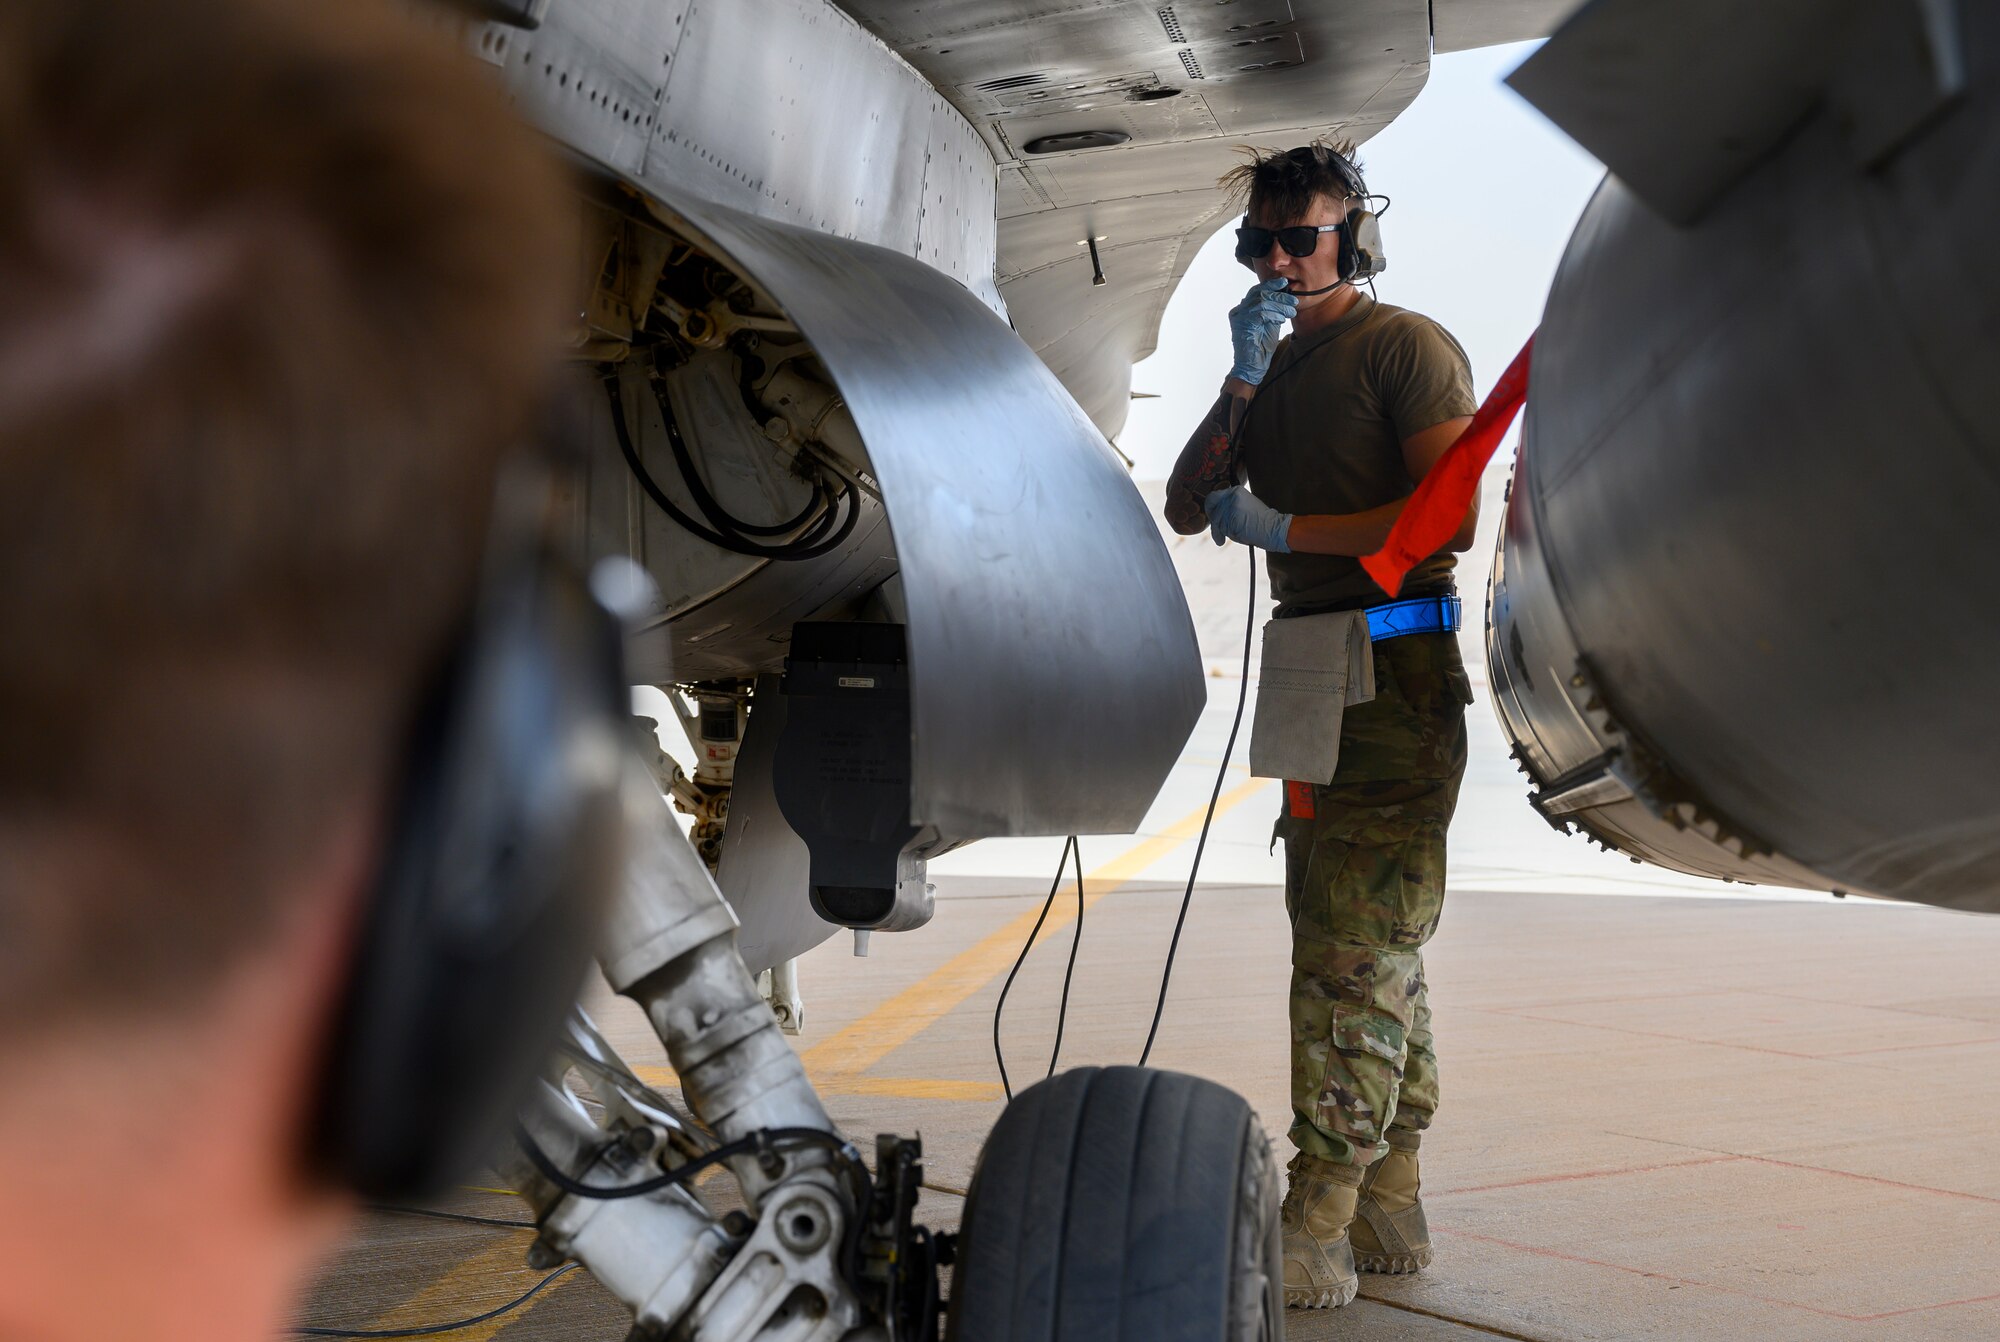 Senior Airman Shane Brennan, 379th Expeditionary Maintenance Squadron C-130 crew chief, performs a “hot pit” refueling, Prince Sultan Air Base, Kingdom of Saudi Arabia, May 3, 2021. Hot pit refueling is where maintainers refuel an aircraft while the engine is still running, allowing the aircraft to safely and quickly return to flying. (U.S. Air Force Photo by Senior Airman Samuel Earick)